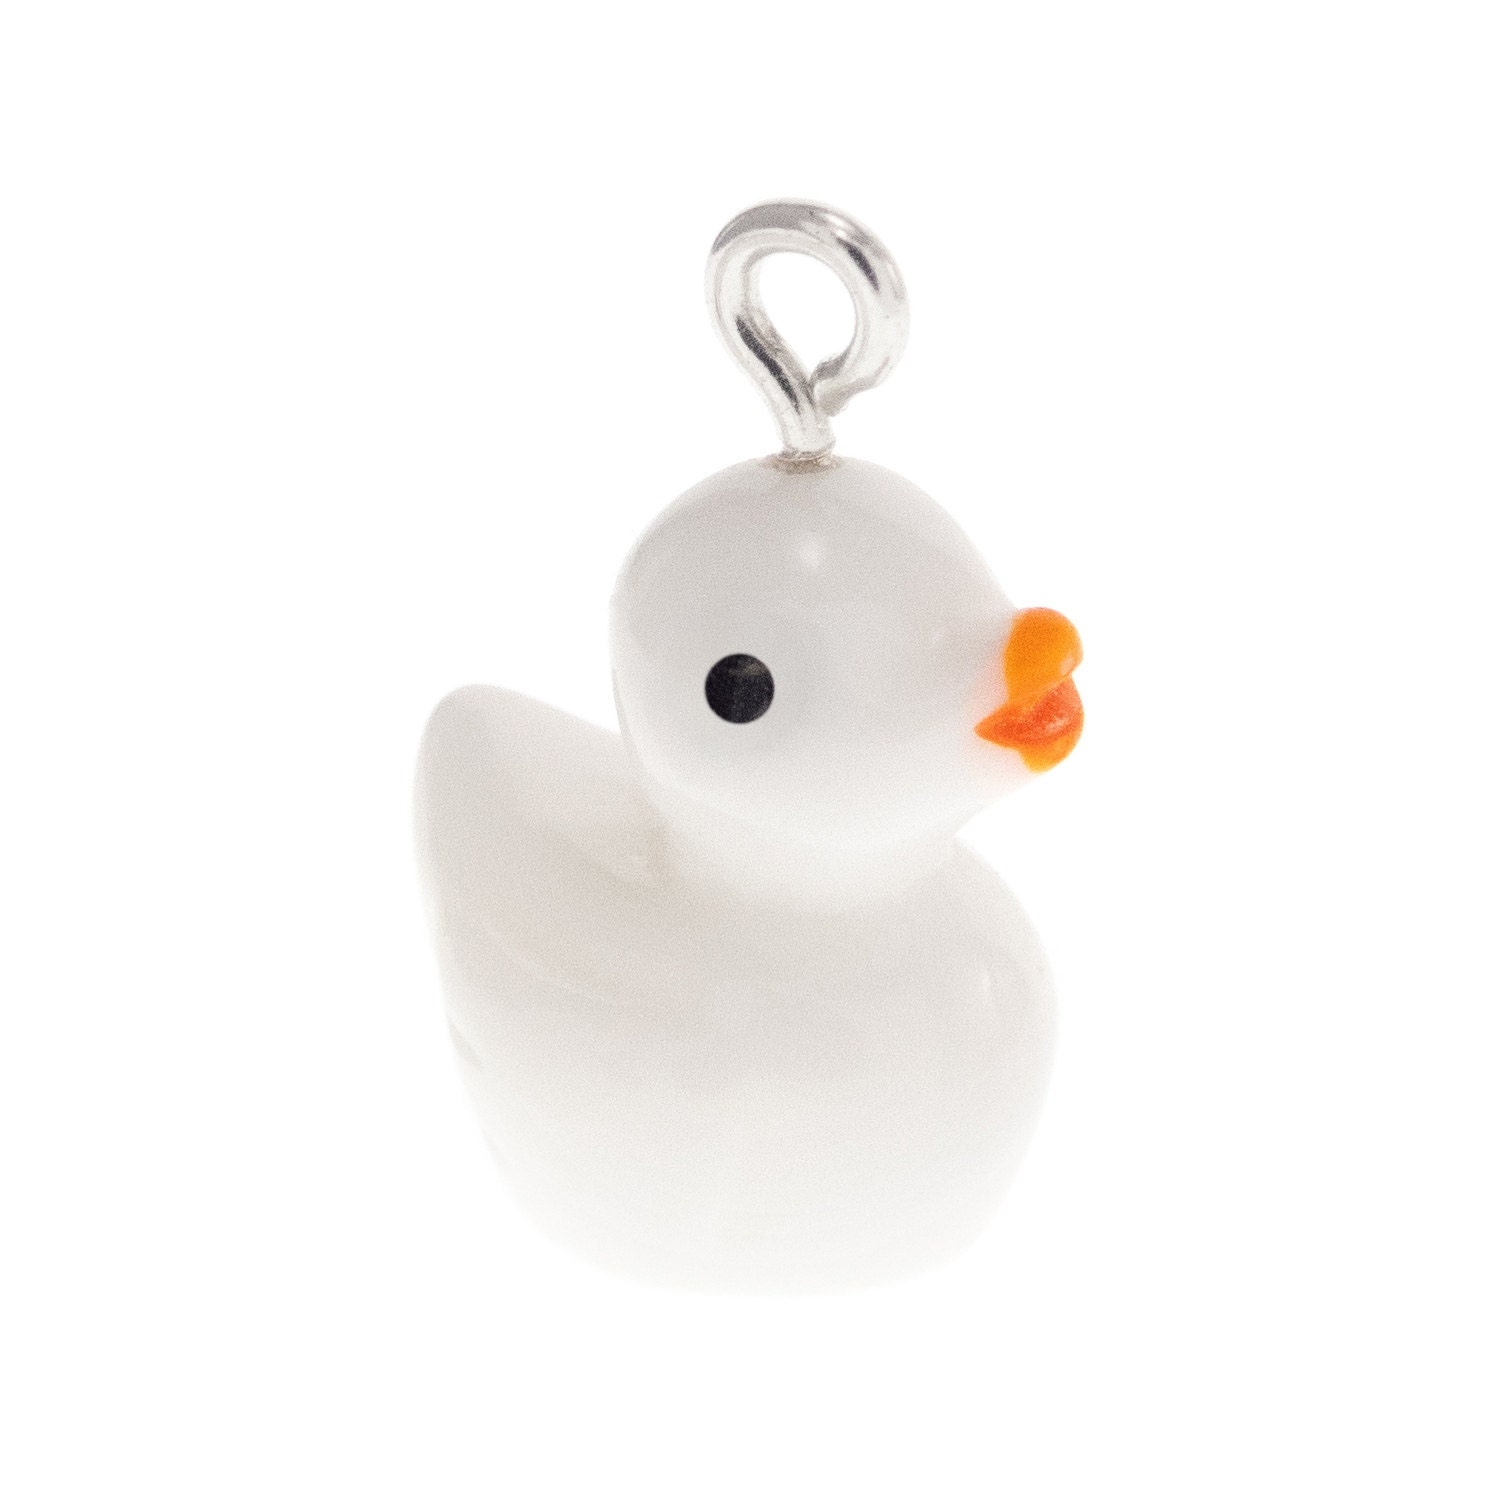 beach surf necklace for ladies with rubber duck pendant